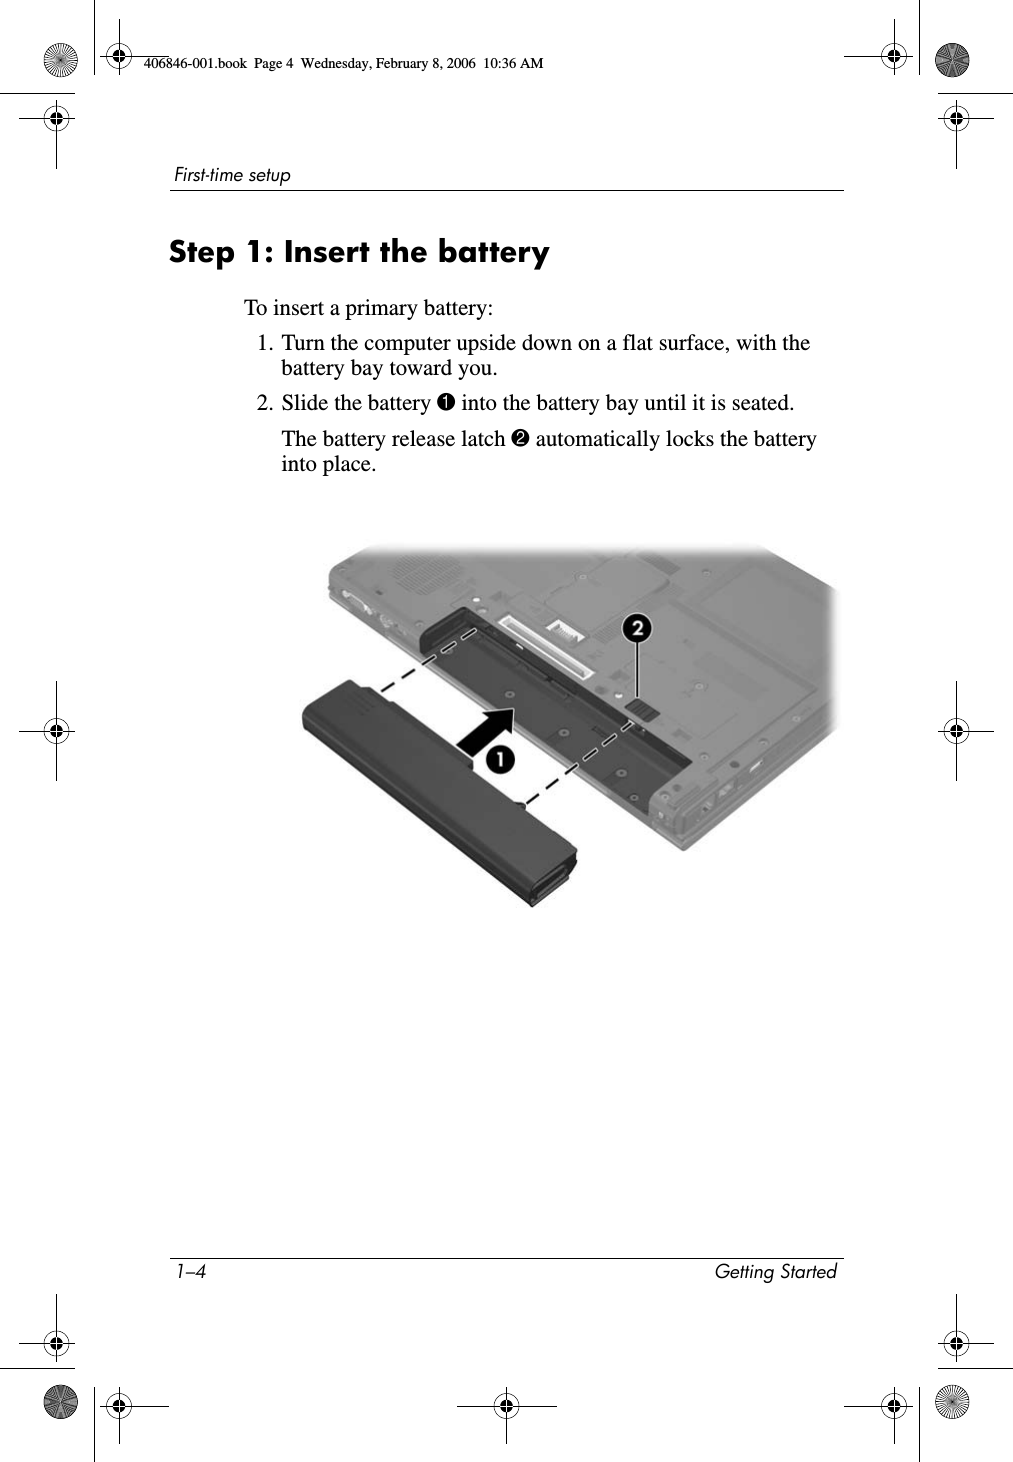 1–4 Getting StartedFirst-time setupStep 1: Insert the batteryTo insert a primary battery:1. Turn the computer upside down on a flat surface, with the battery bay toward you.2. Slide the battery 1 into the battery bay until it is seated.The battery release latch 2 automatically locks the battery into place.406846-001.book  Page 4  Wednesday, February 8, 2006  10:36 AM